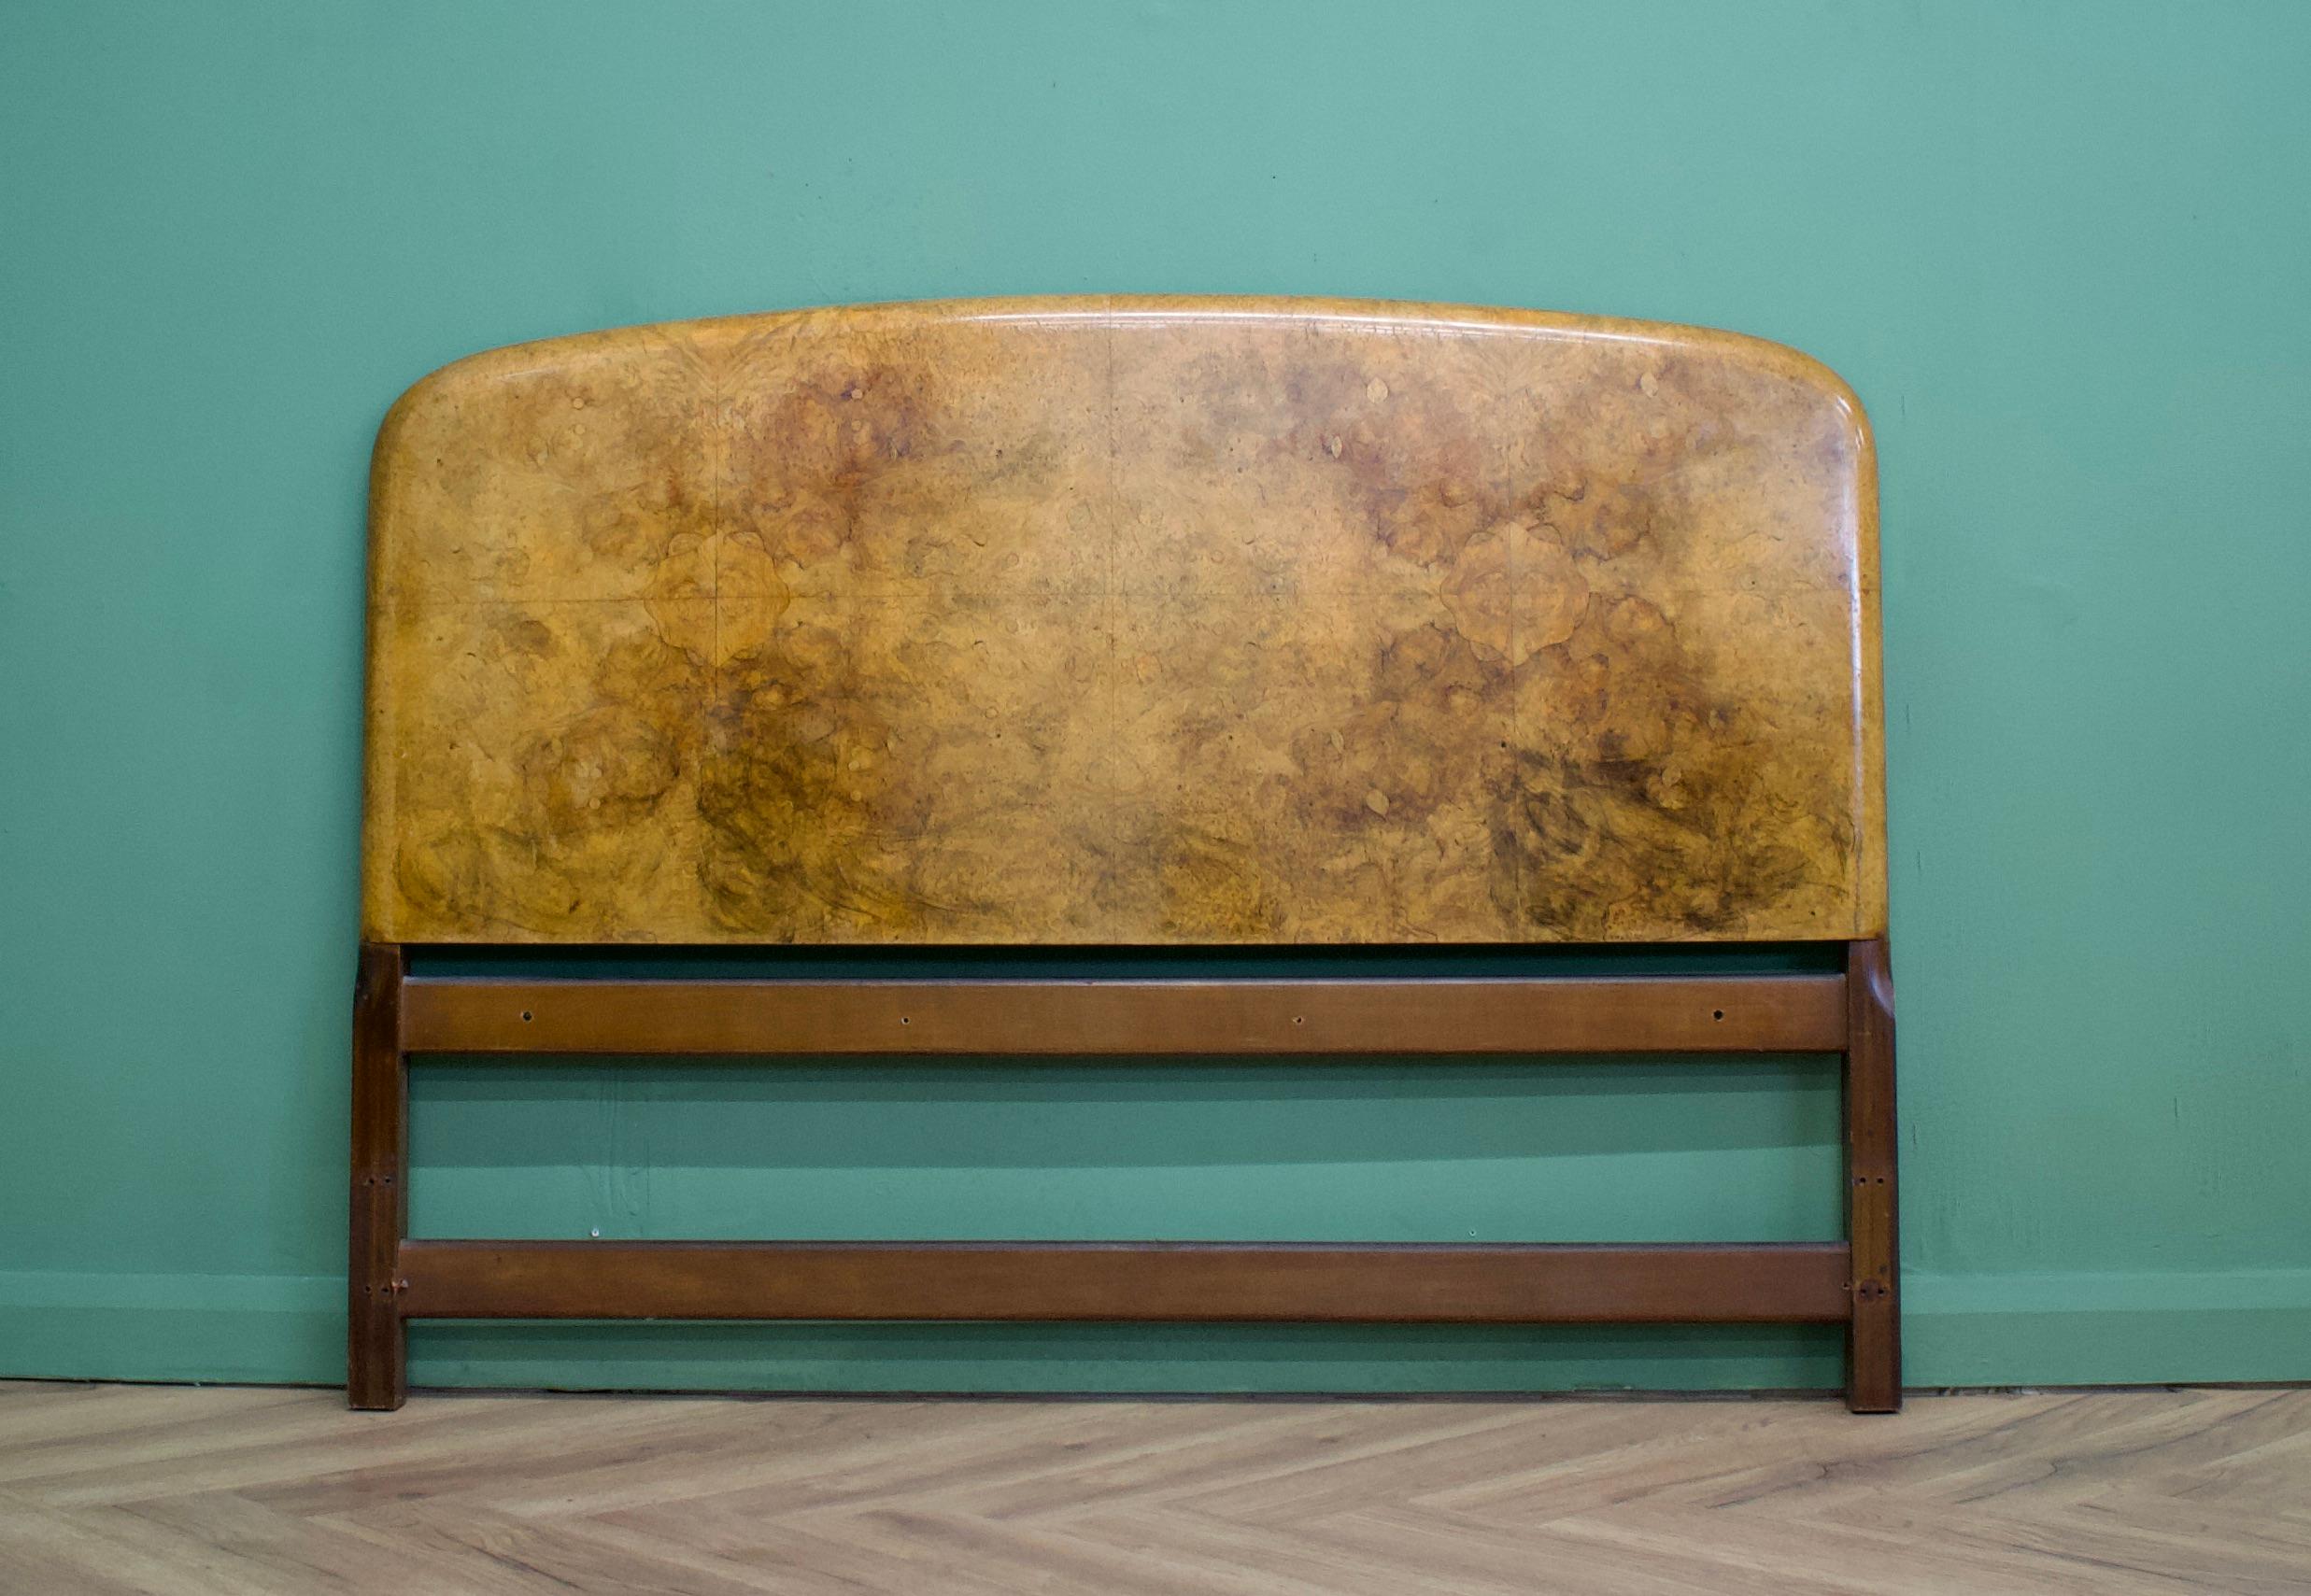 A burr walnut Art Deco headboard for a double bed - circa 1930's


This matches the triple door wardrobe and compactum listed separately 